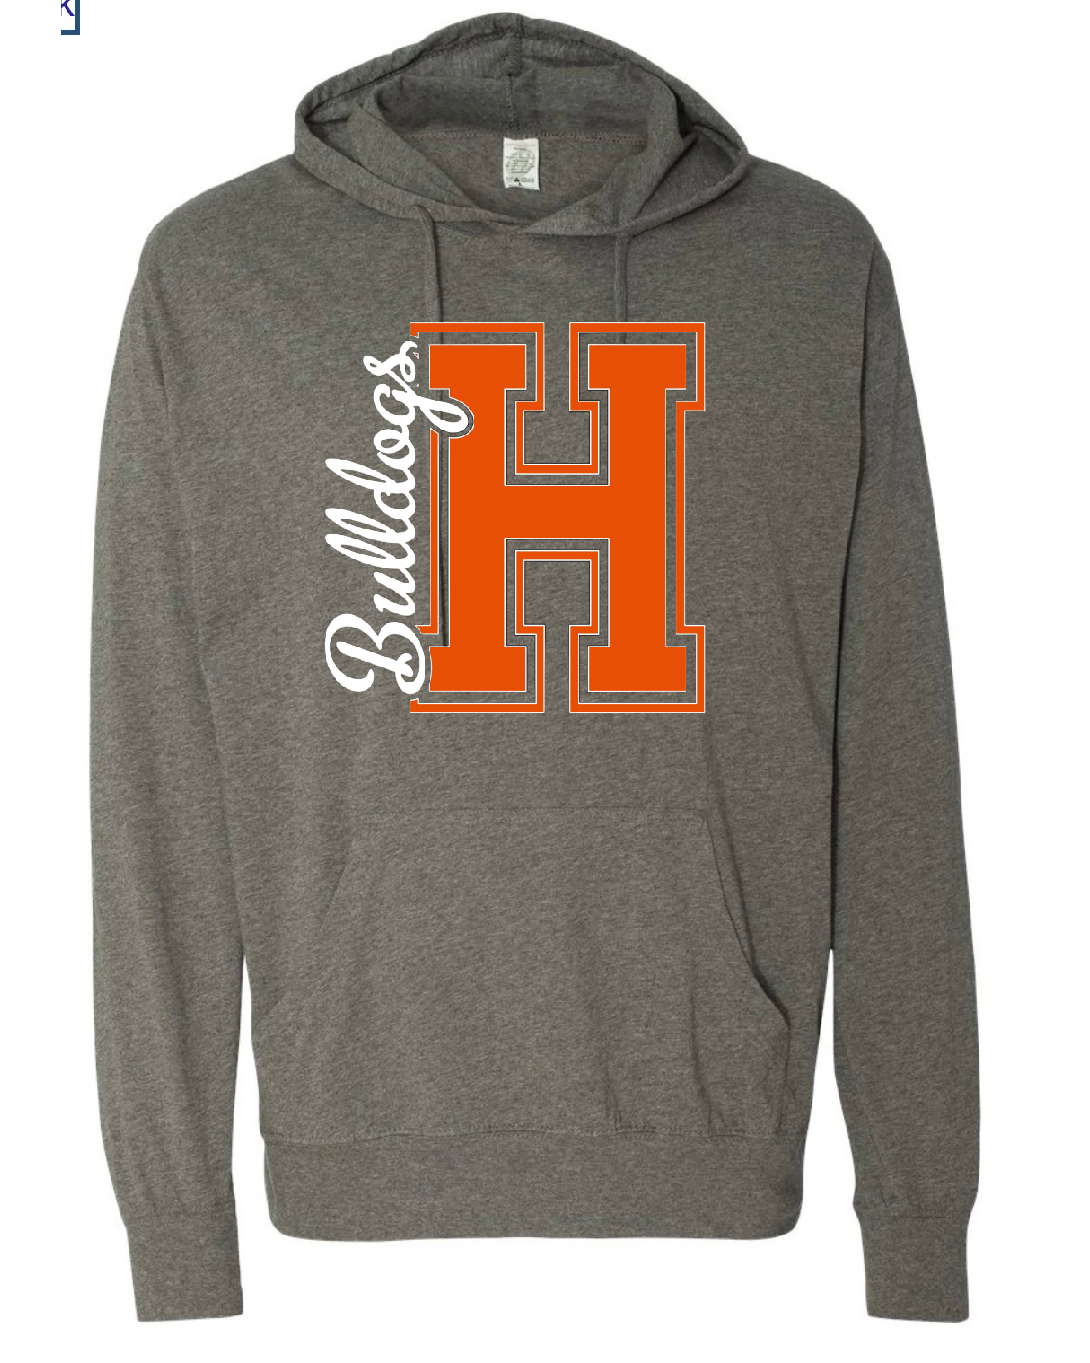 Block H Cursive Bulldogs Hooded Long-Sleeve Tee with front pocket